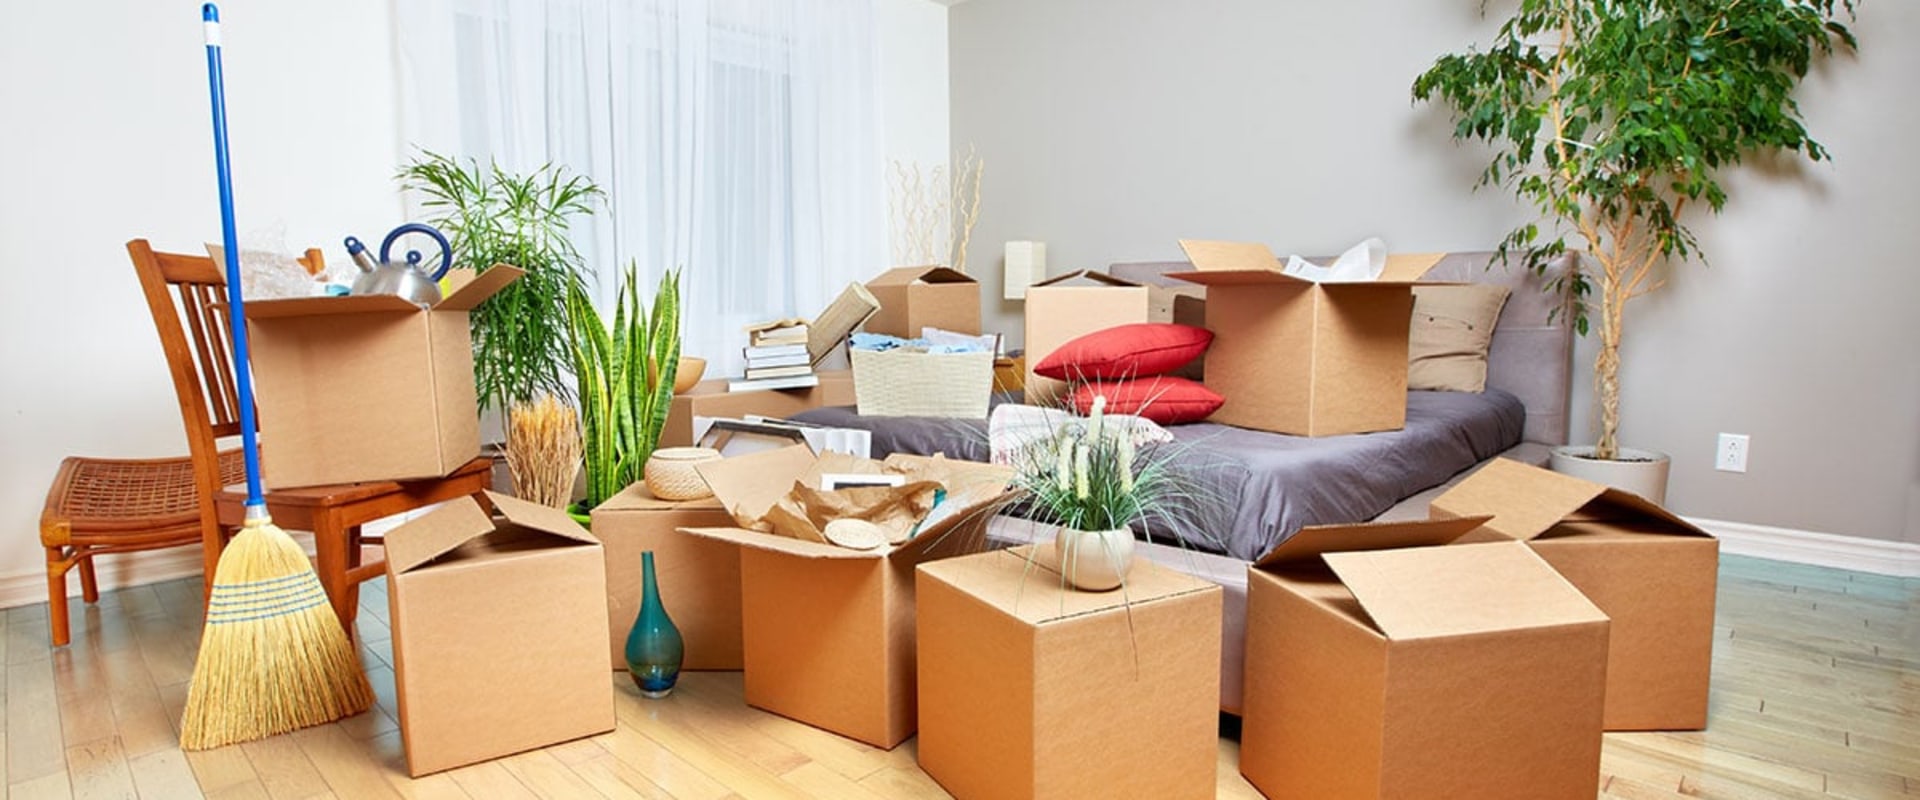 What should i do to prepare for a house move?